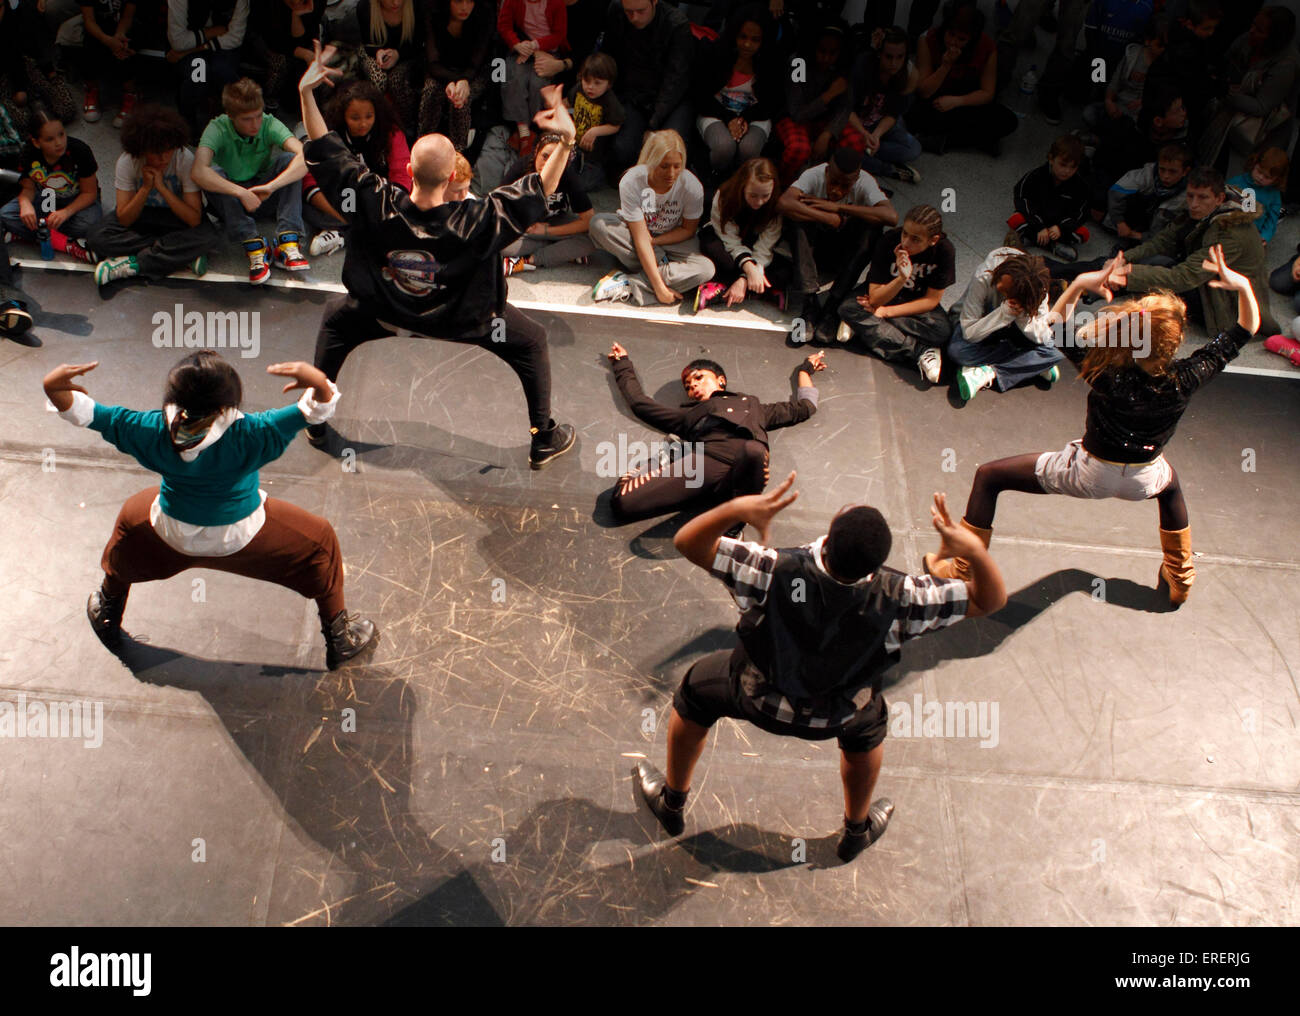 Hip hop or Streetdance group Stock Photo